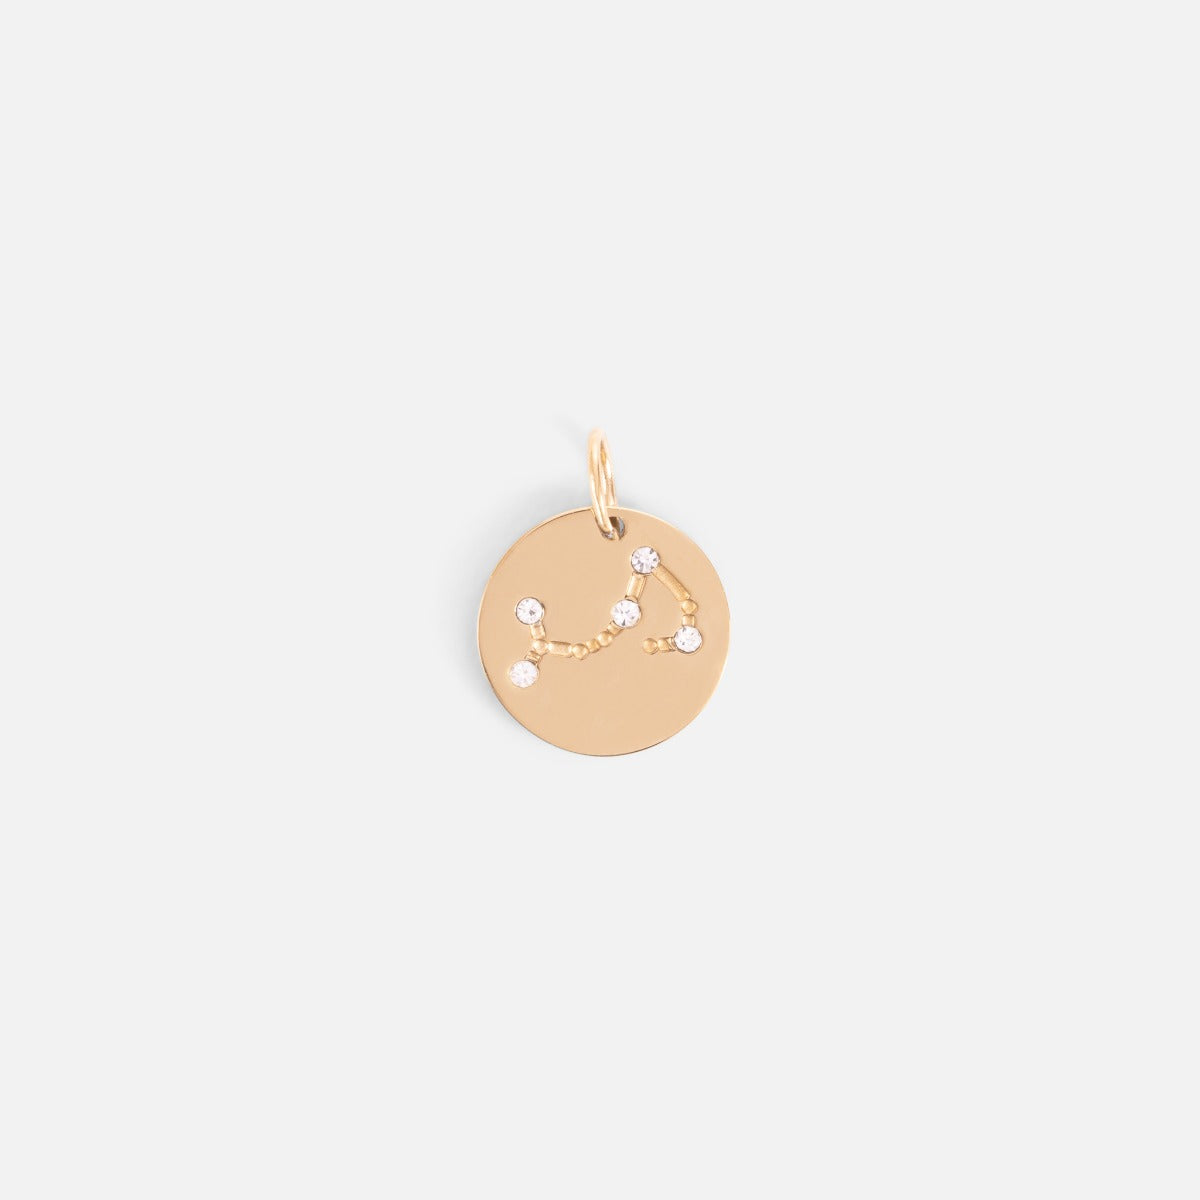 Small golden charm engraved with the zodiac constellation "scorpio"